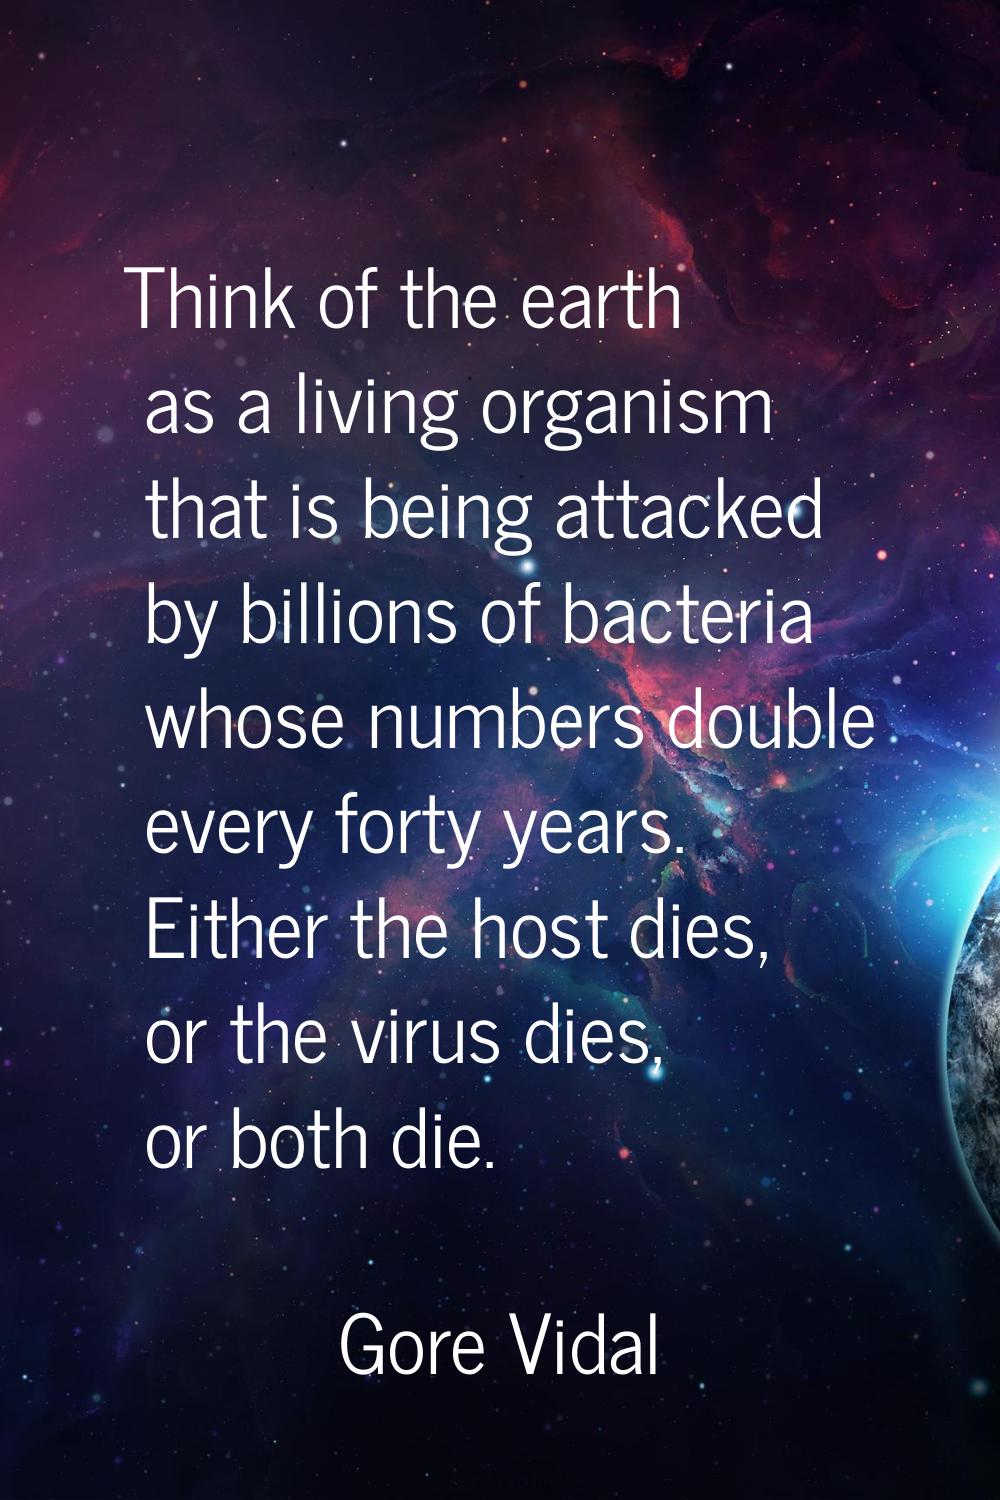 Think of the earth as a living organism that is being attacked by billions of bacteria whose number